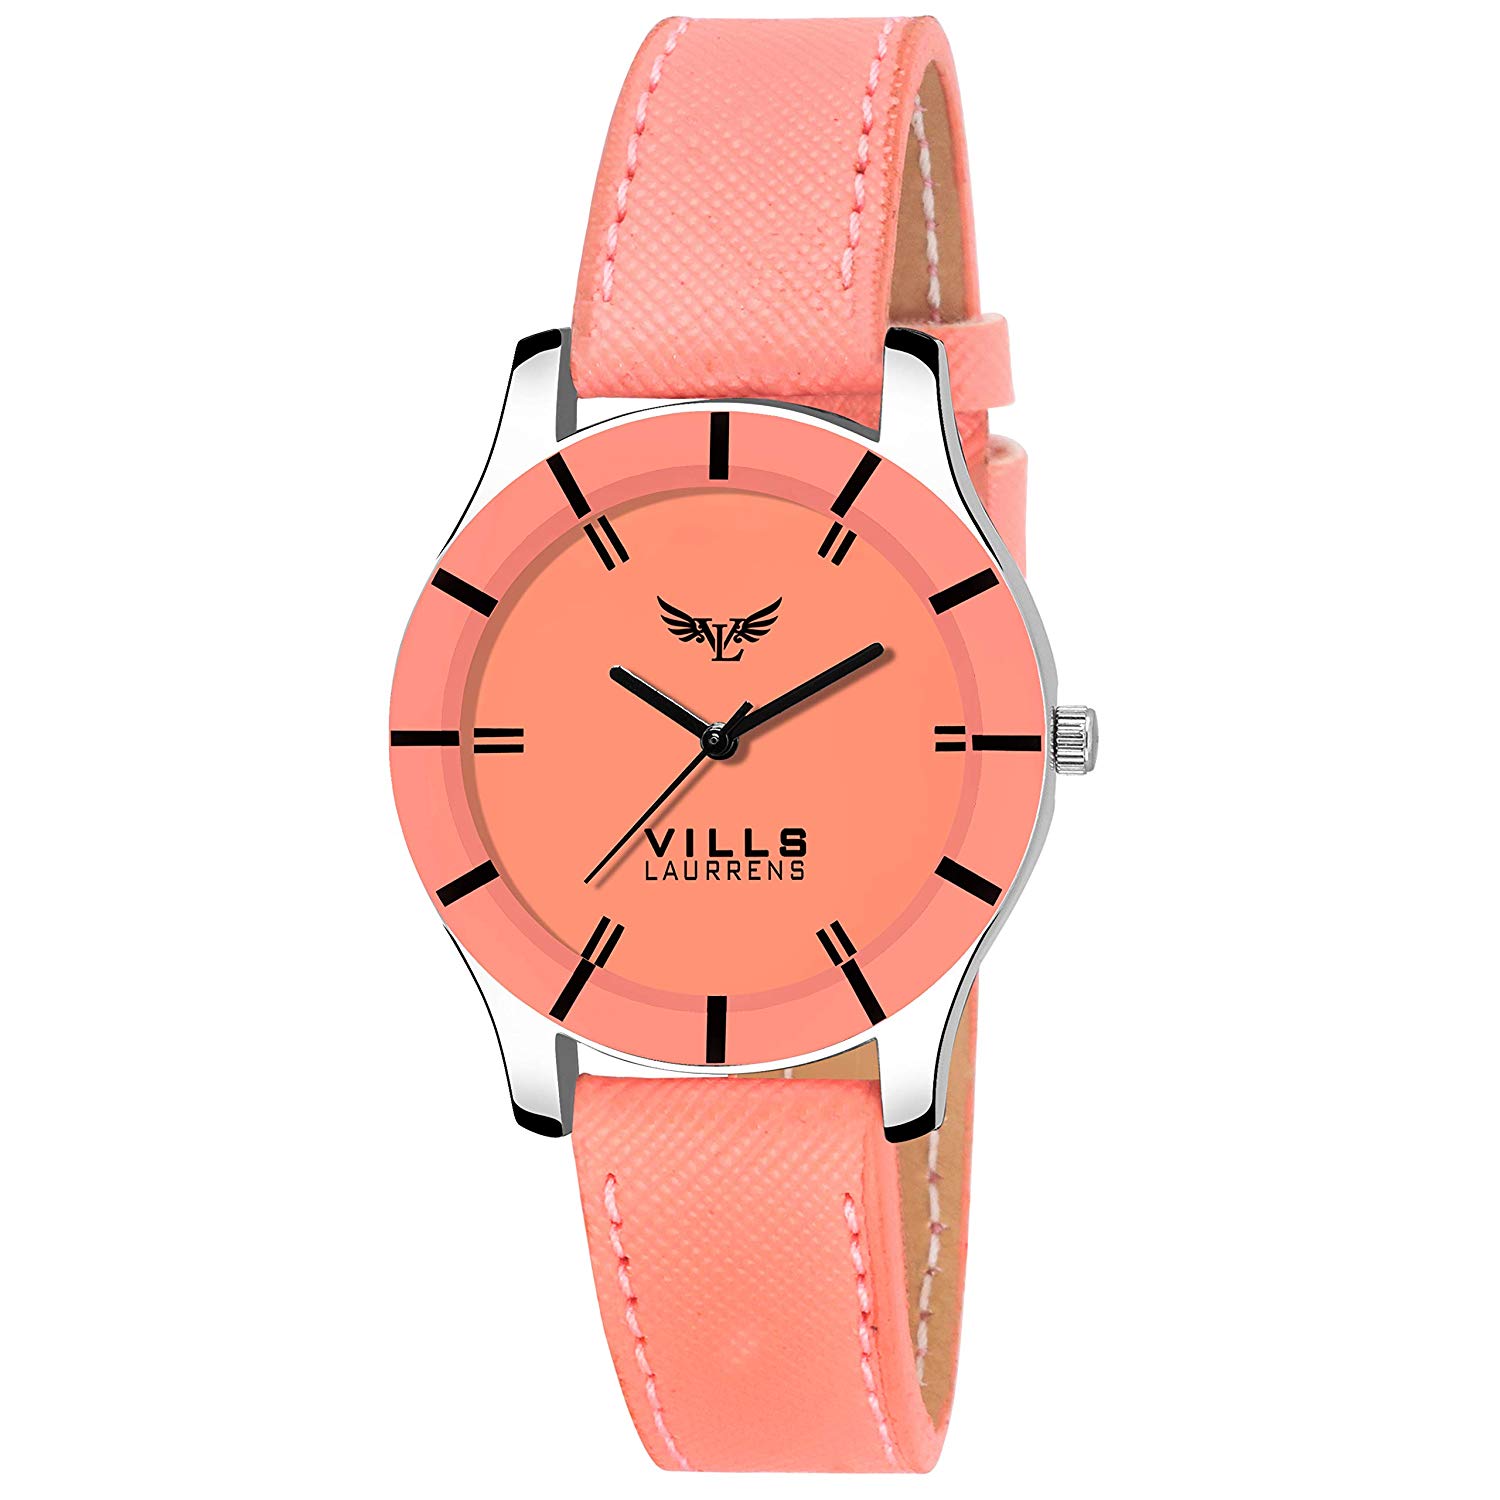 Vills Laurrens Latest Orange, Leather Strap Watch for Women and Girls 